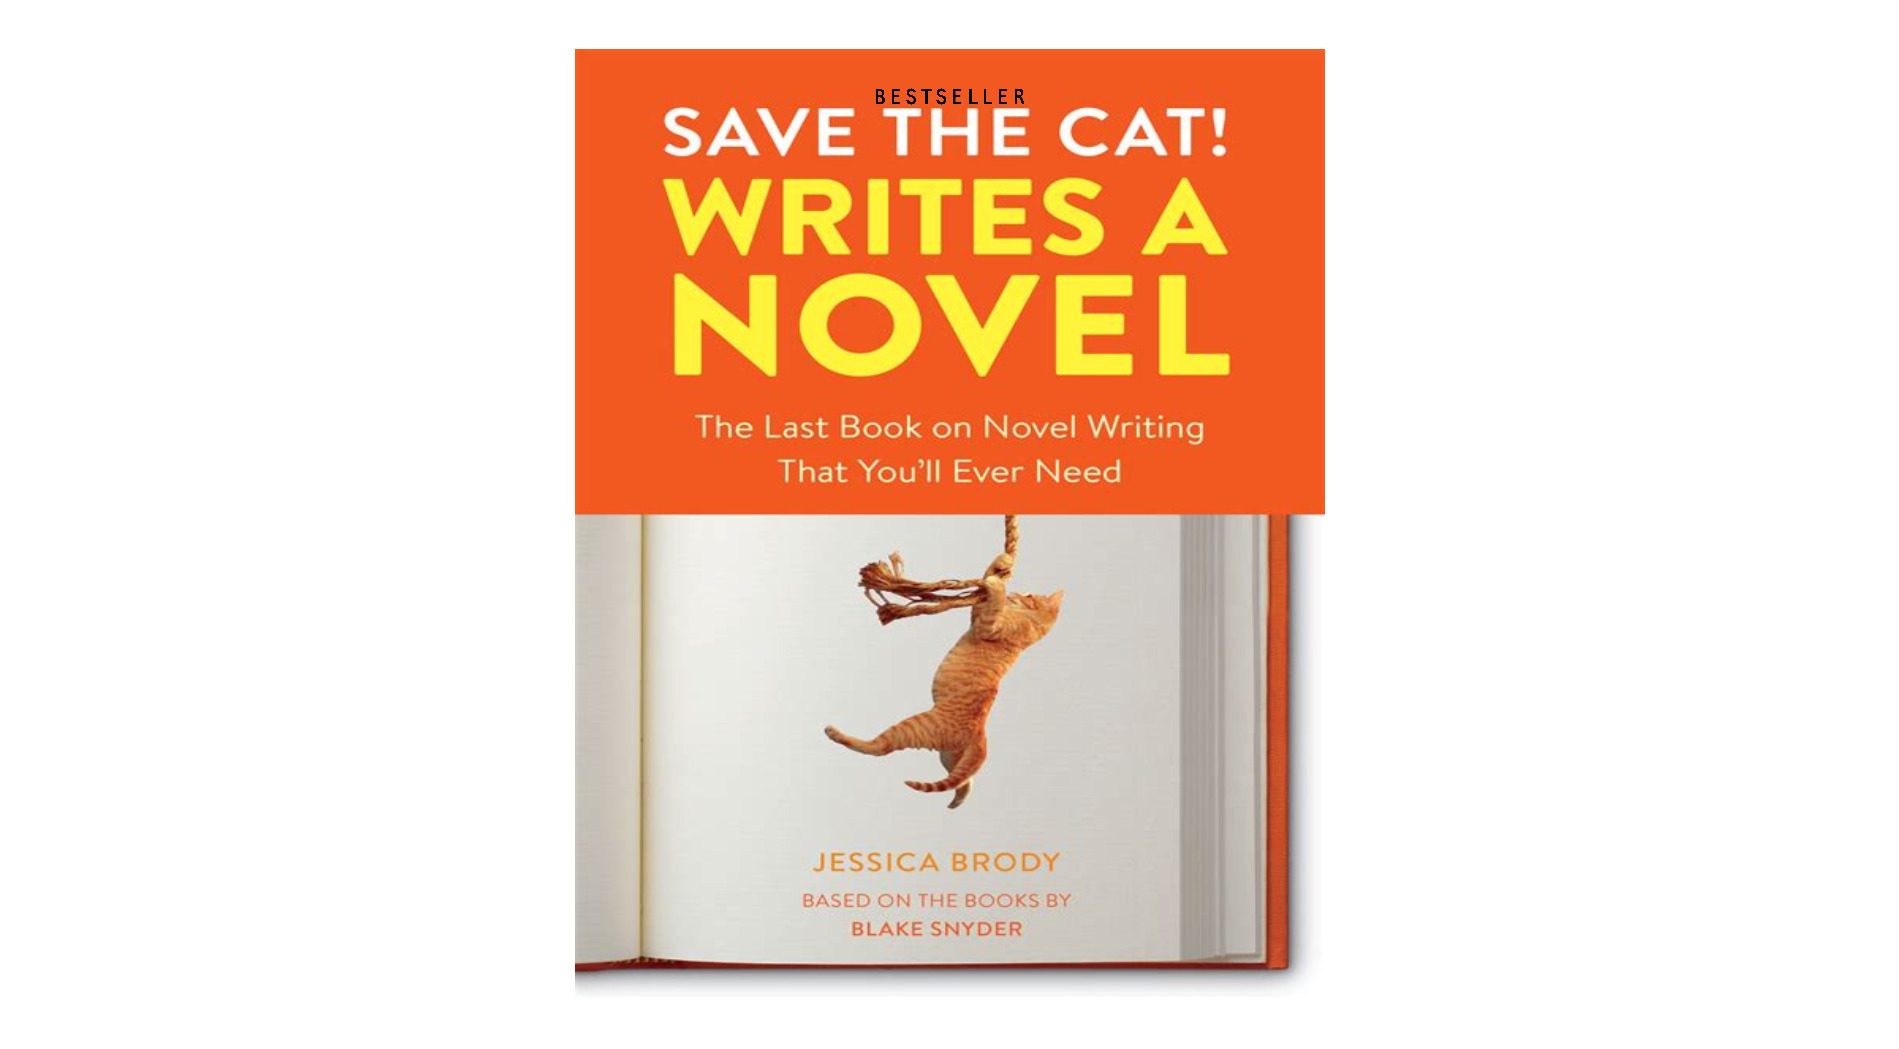 Download [EPUB] Save the Cat! Writes a Novel by Jessica Brody : dasdaw